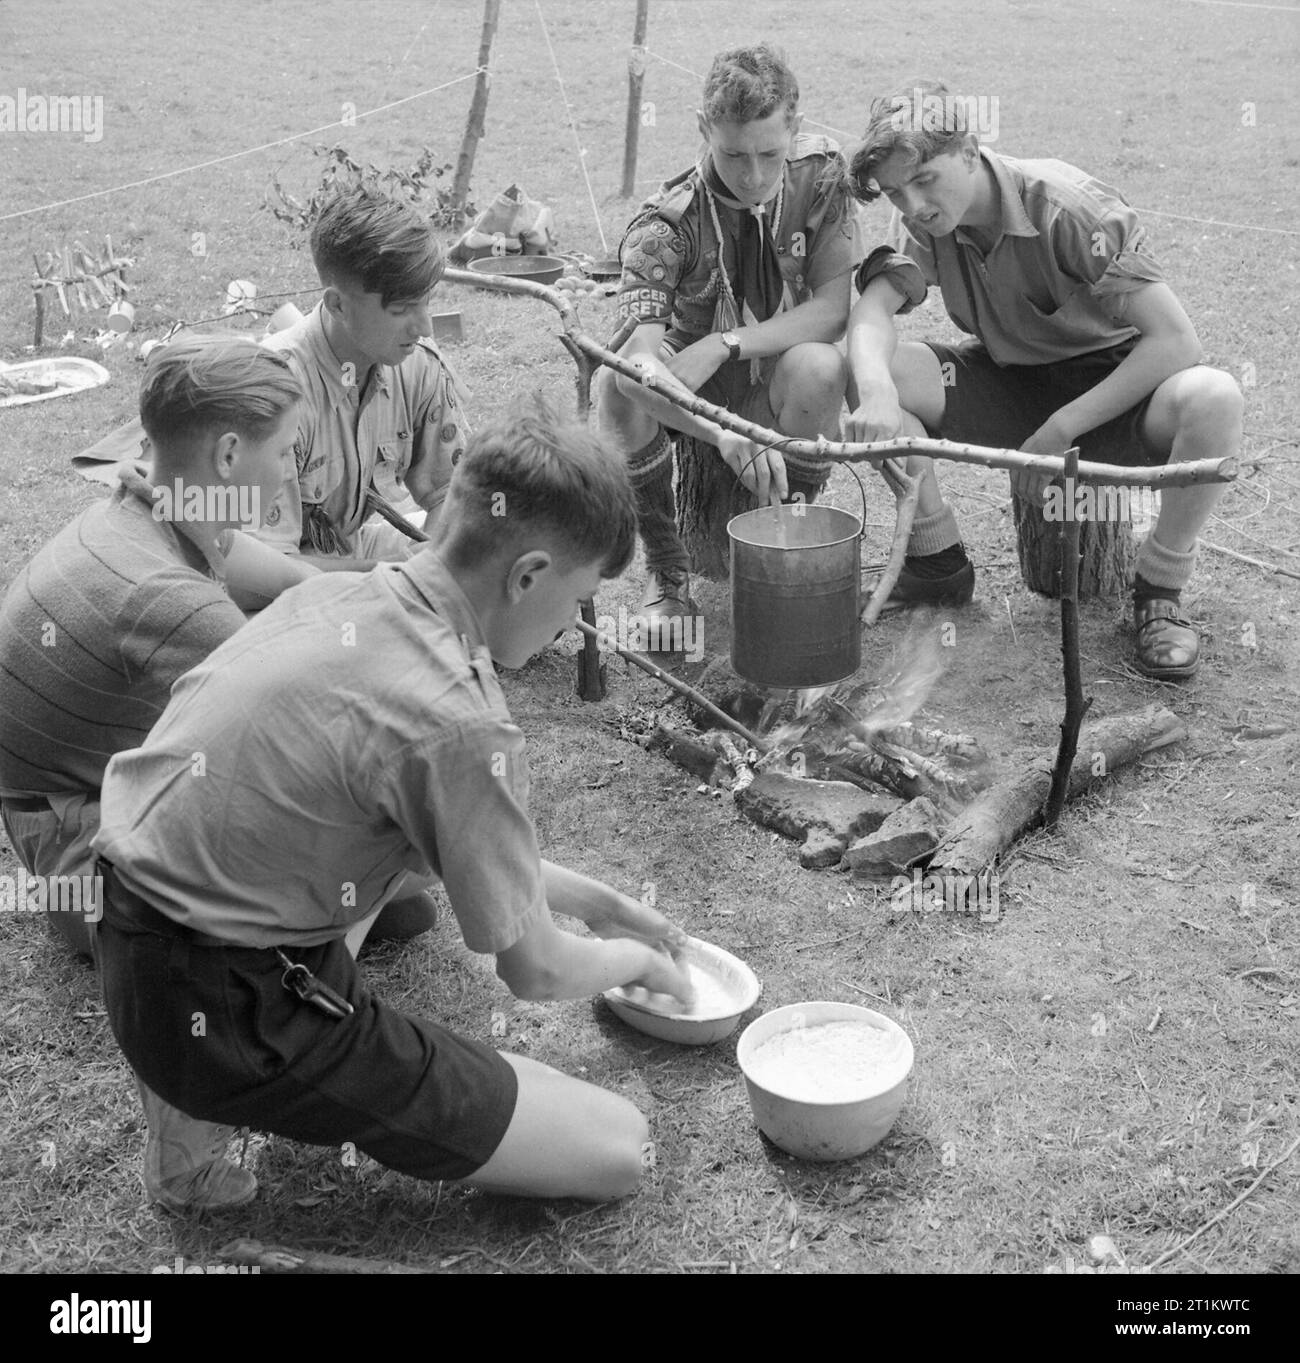 Youth Gathering- Residential Training For Youth Organisations, Sidcot School, Winscombe, Somerset, England, UK, 1943 Five Boy Scouts make bread over a camp fire as part of a week-long youth training course being held at Sidcot School in Somerset. In the foreground, one Scout is making the dough, whilst behind him another stirs the steaming billy can hanging over the camp fire. Stock Photo